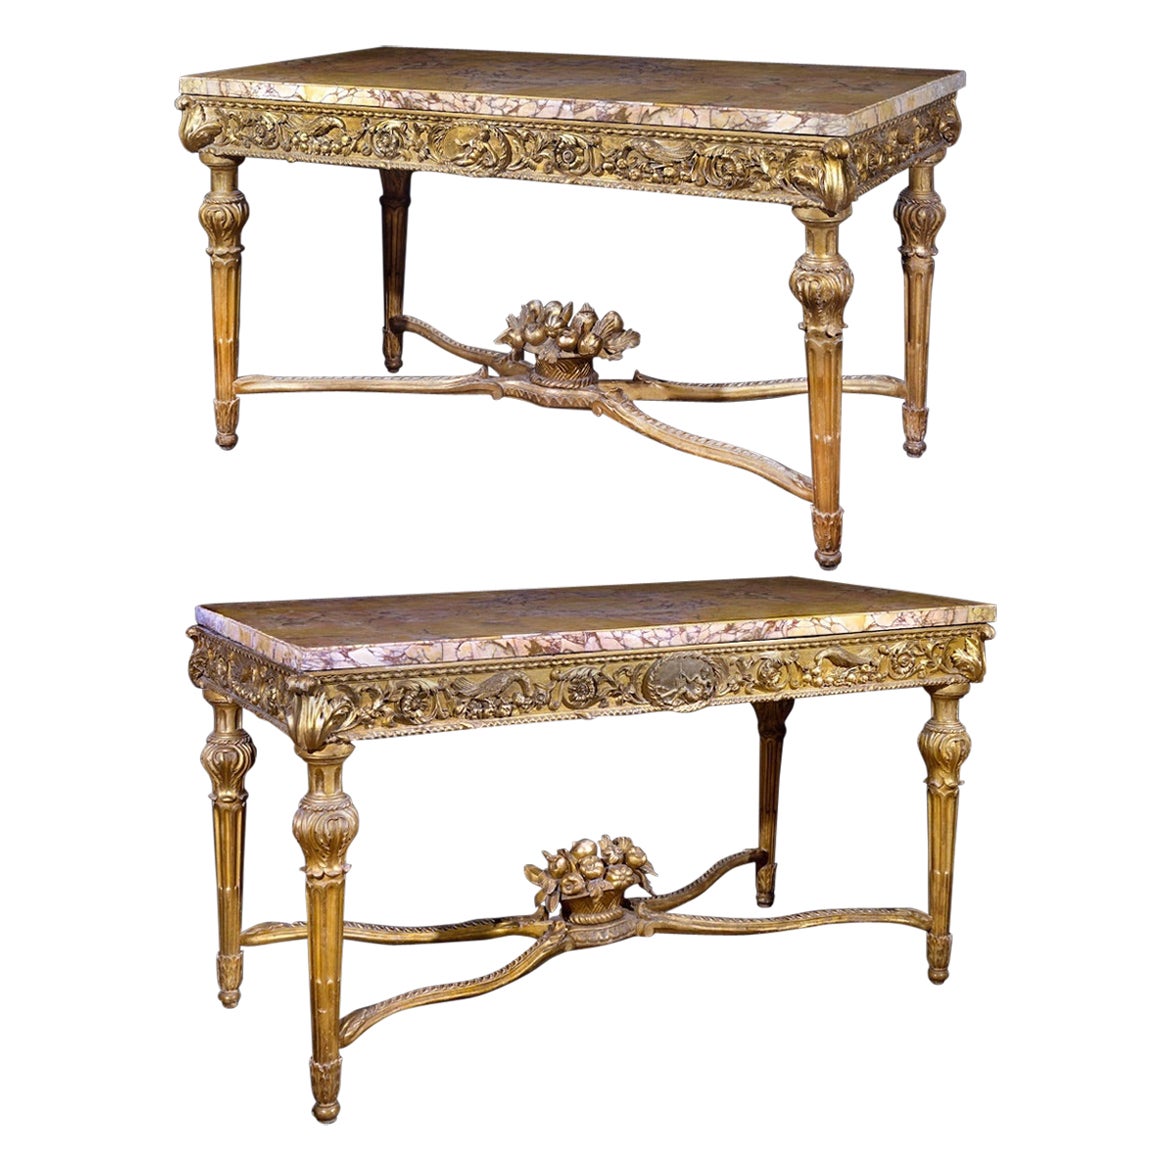 Extraordinary Pair of Italian 18th Century Carved Gilt-Wood Console Tables For Sale